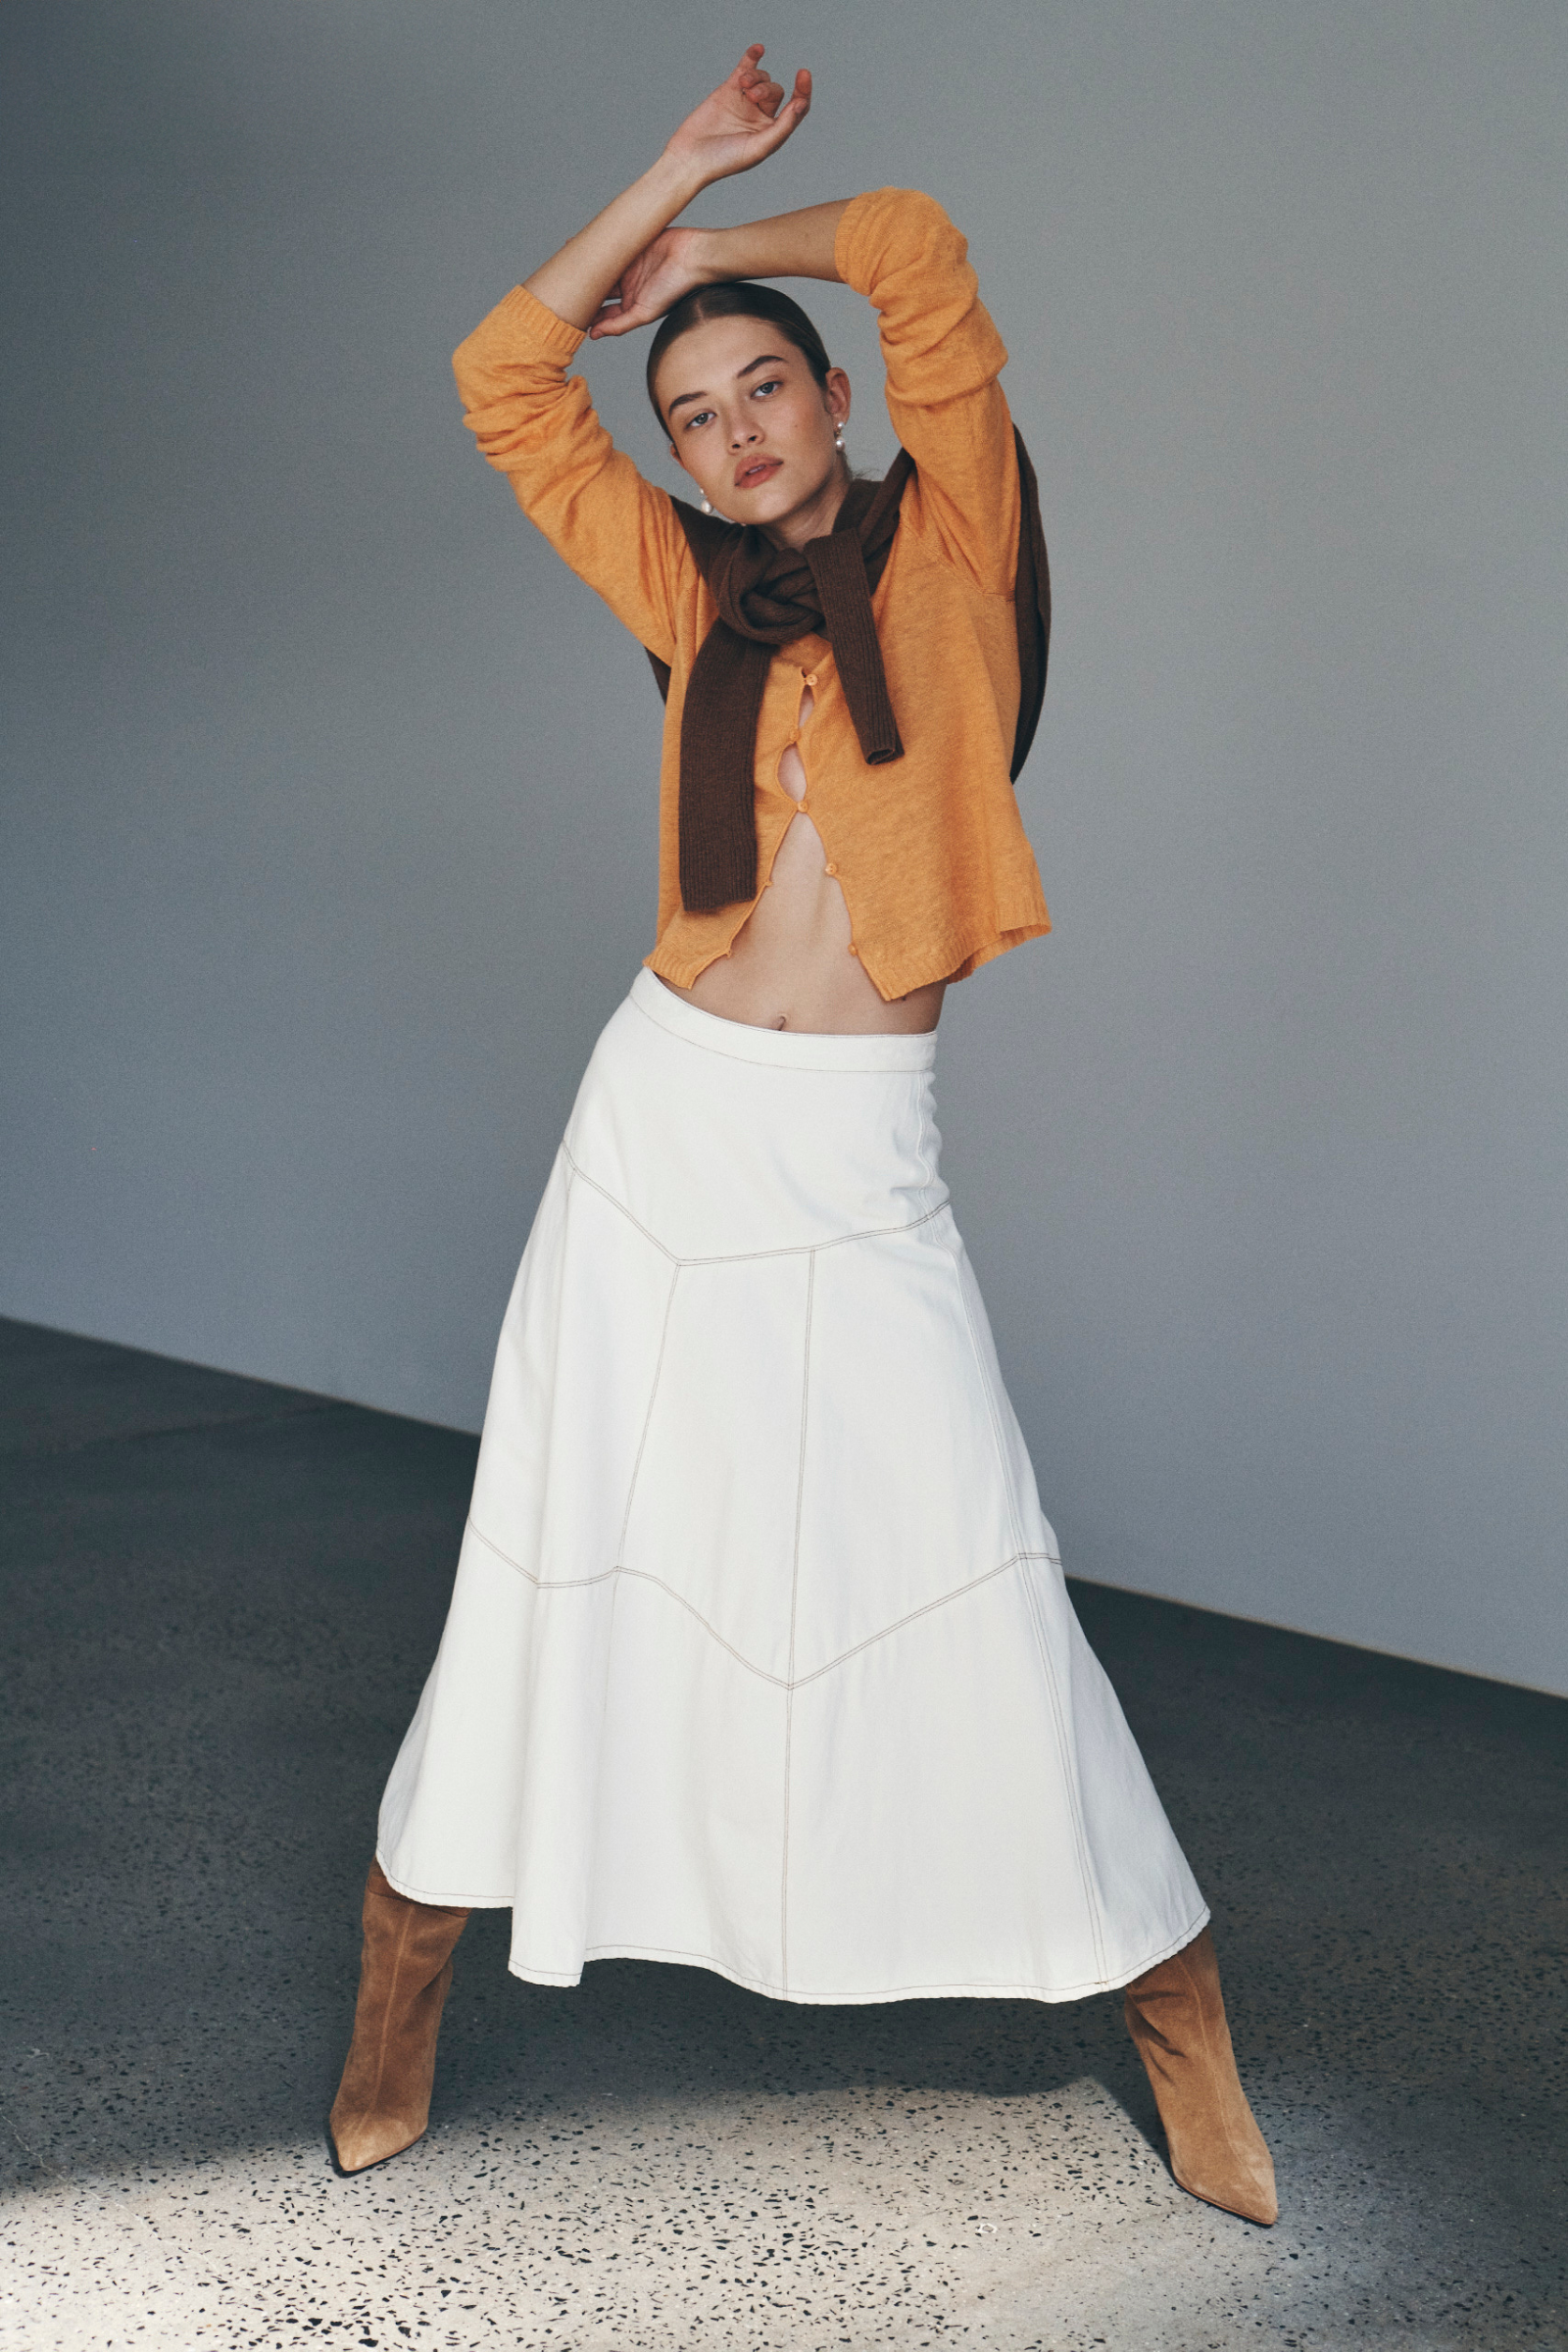 Bianca wears the Marcia Knit Long Sleeve Top and Paloma Midi Skirt with an Enzo Merino Knit Jumper tied around her shoulders. She accessorises with pearl drop earrings, brown suede knee-high boots, and completes the look with a low, slick bun. 